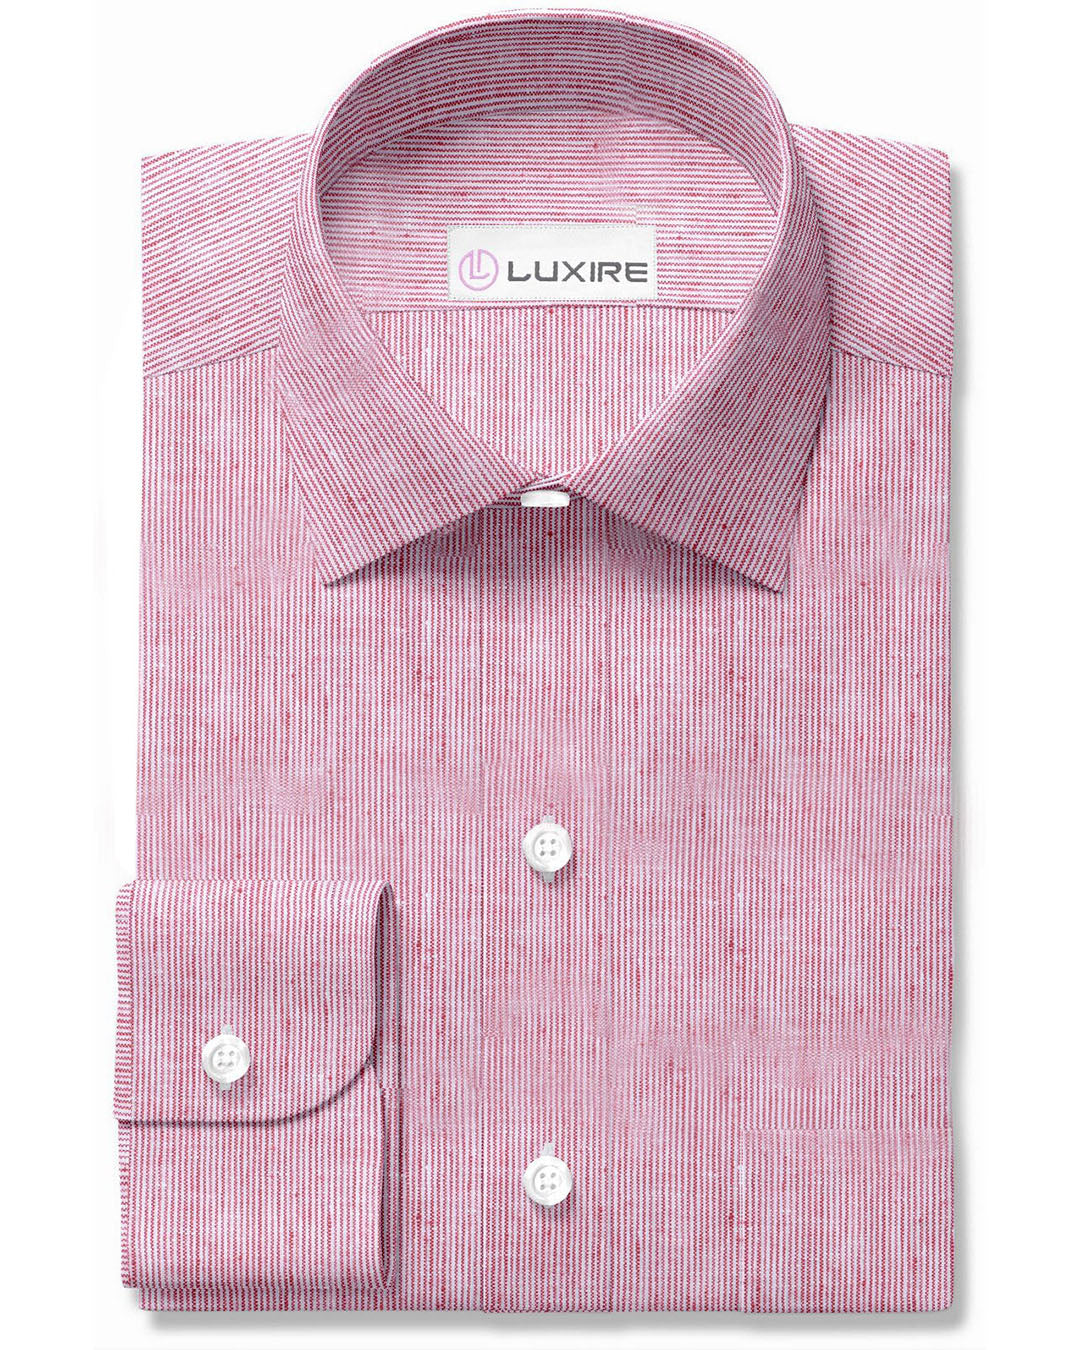 Front of the custom linen shirt for men in red white slub by Luxire Clothing